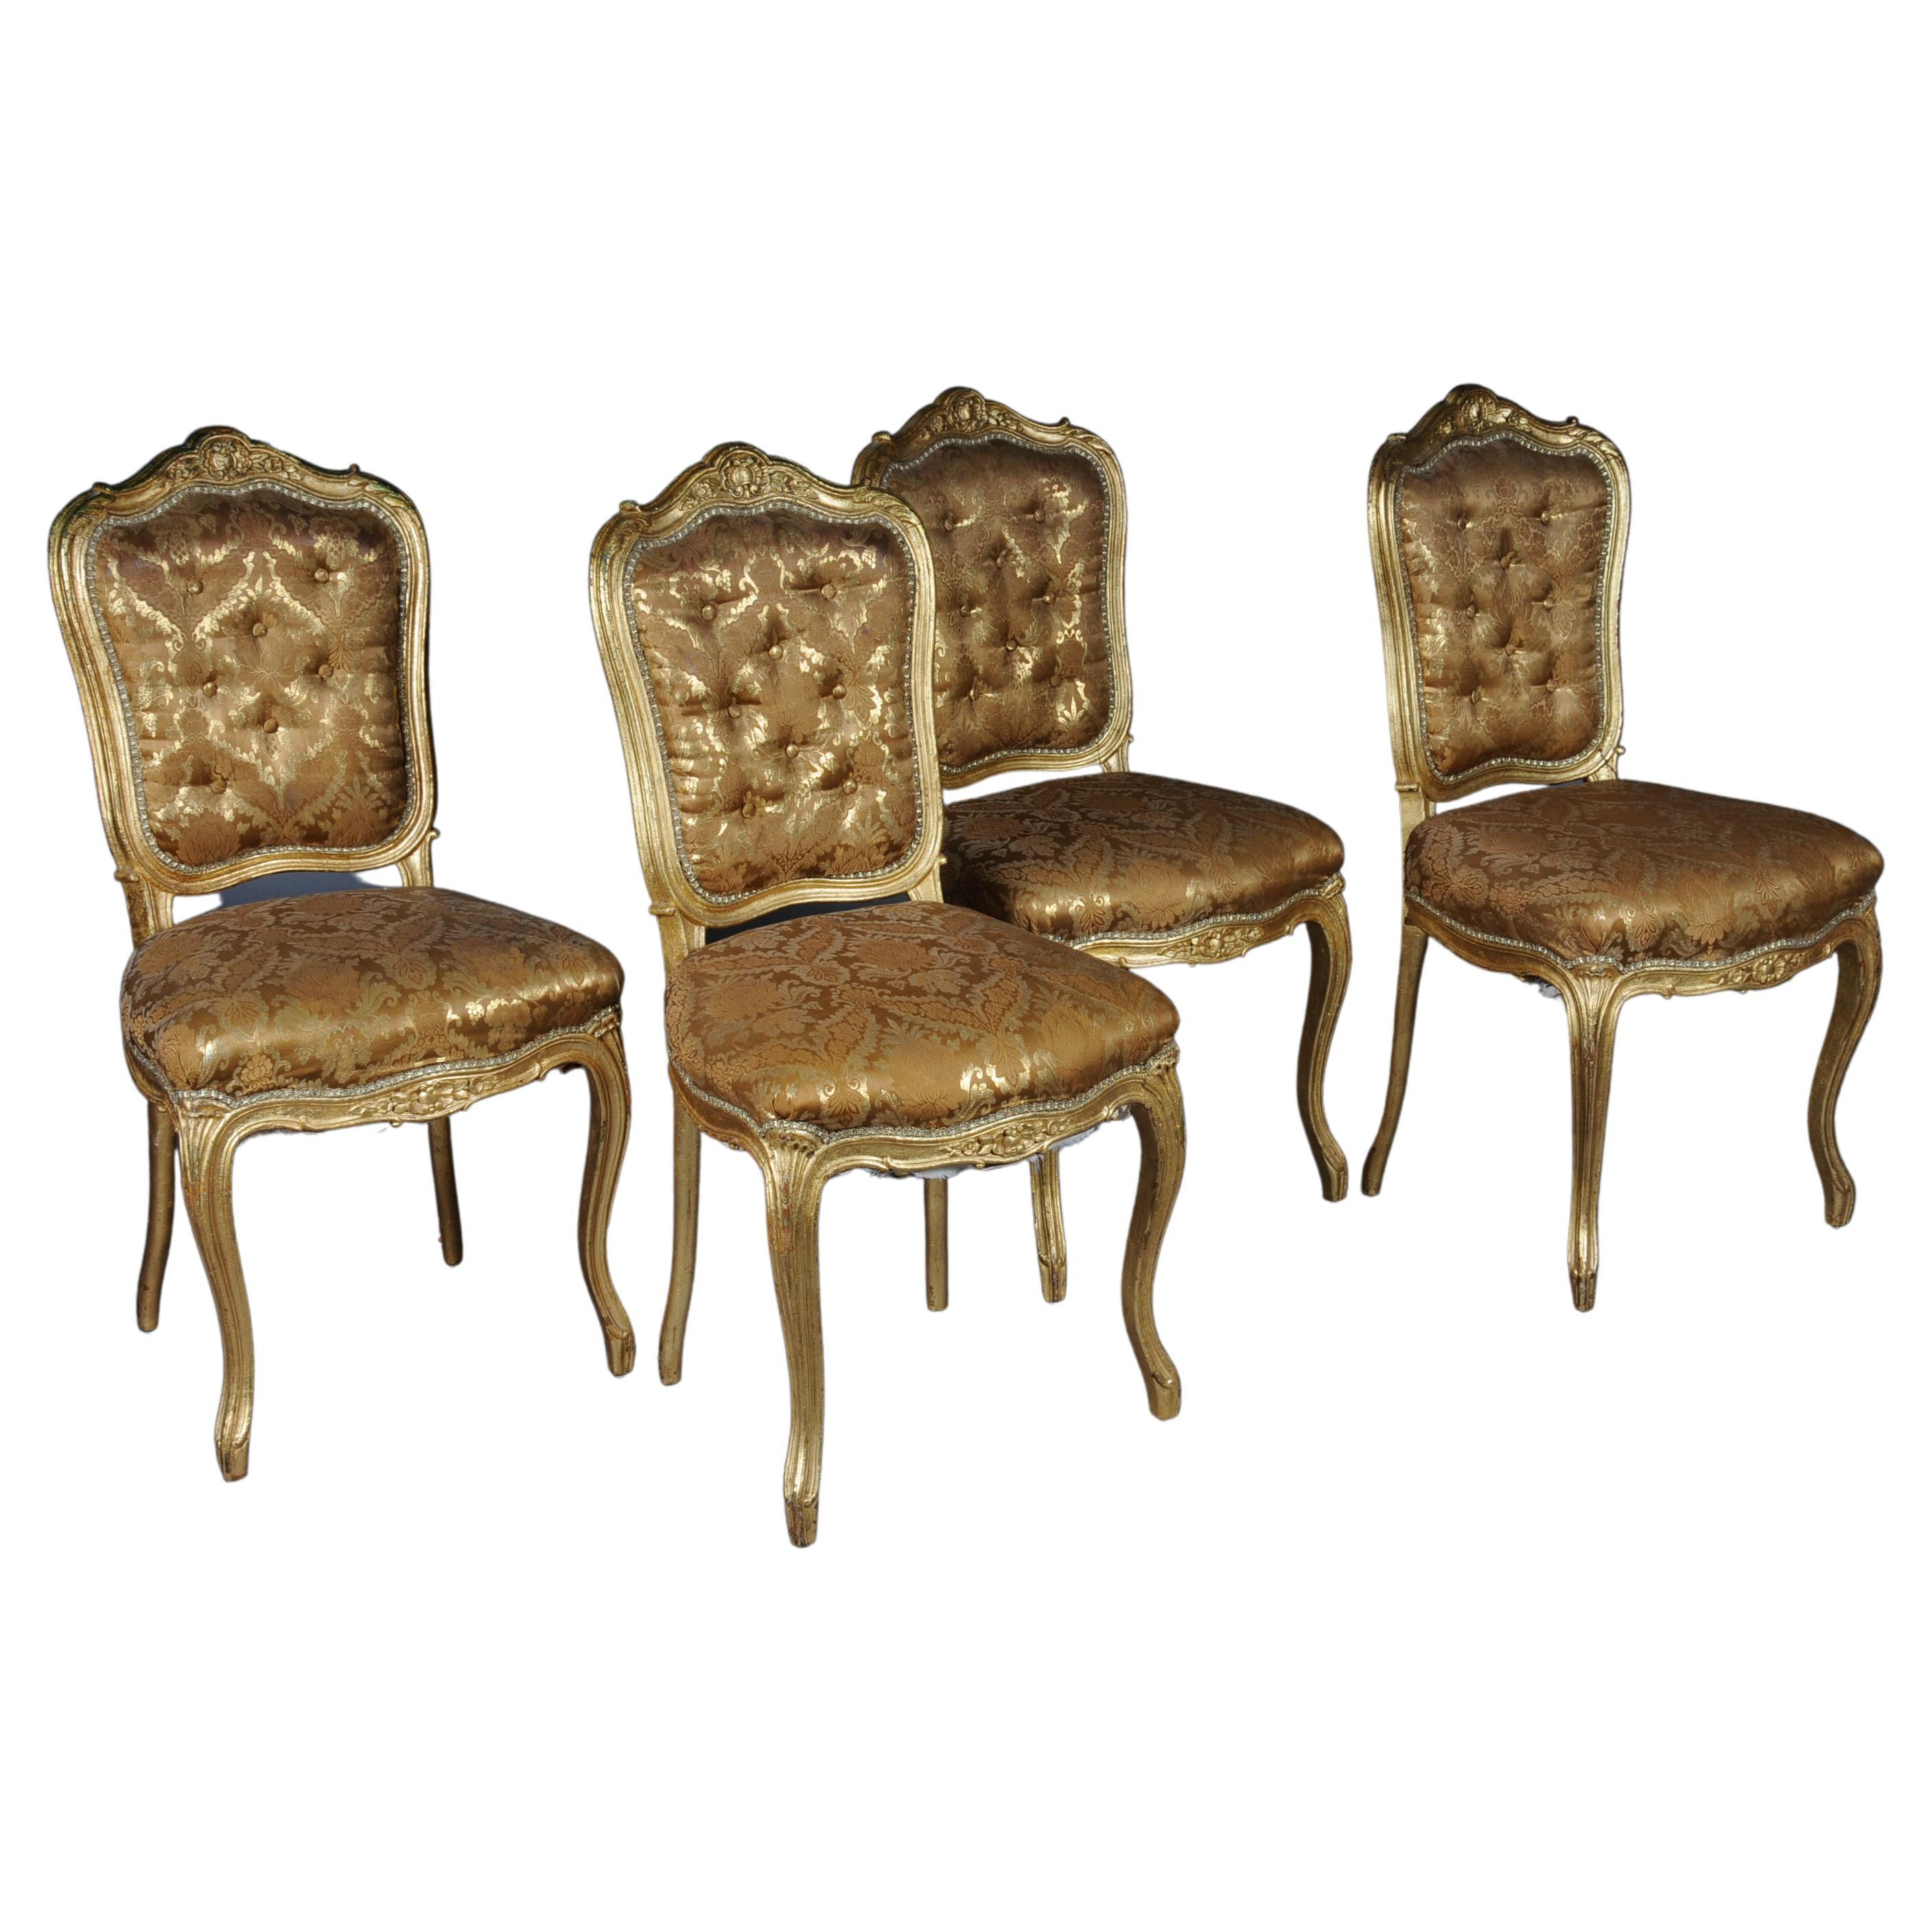 French Salon Chairs from the Bellevue Palace in Berlin, Gold from 1890